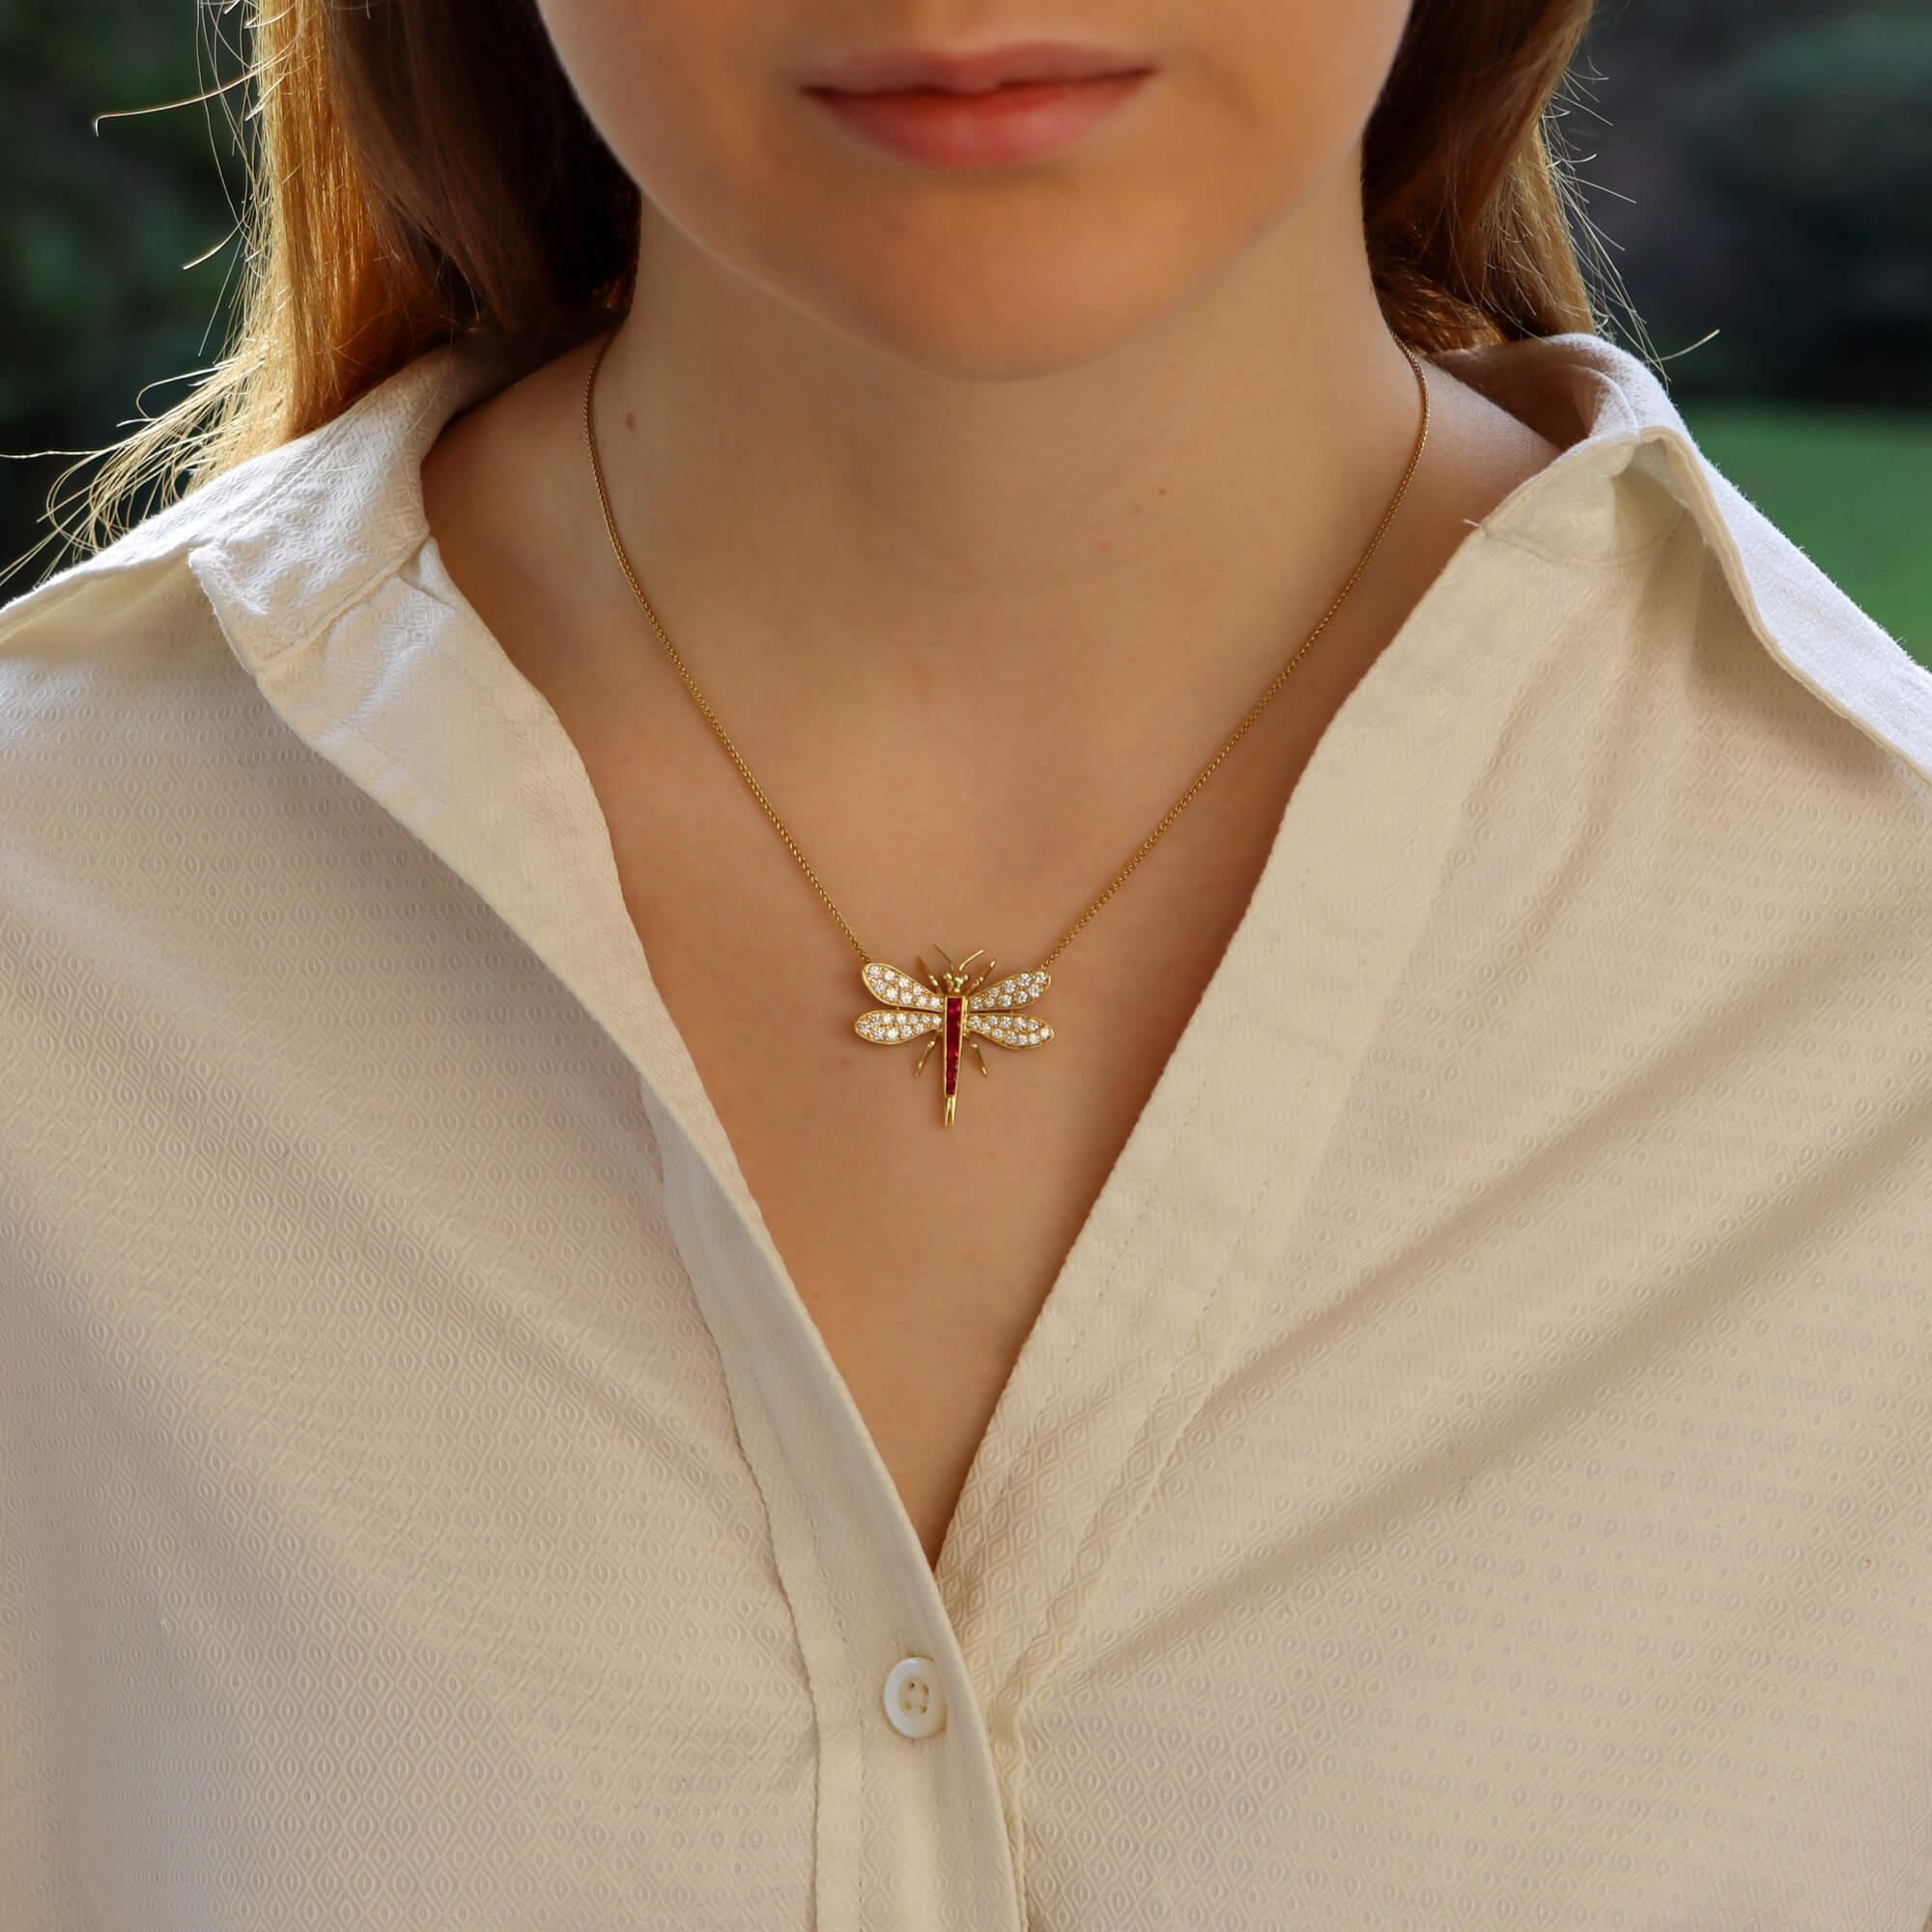 A beautiful ruby and diamond dragonfly pendant necklace set in 18k yellow gold.

This rather unique piece depicts a naturalistic dragonfly fixed on a simple, yet secure, yellow gold trace chain. Firstly, the body of the insect is composed of